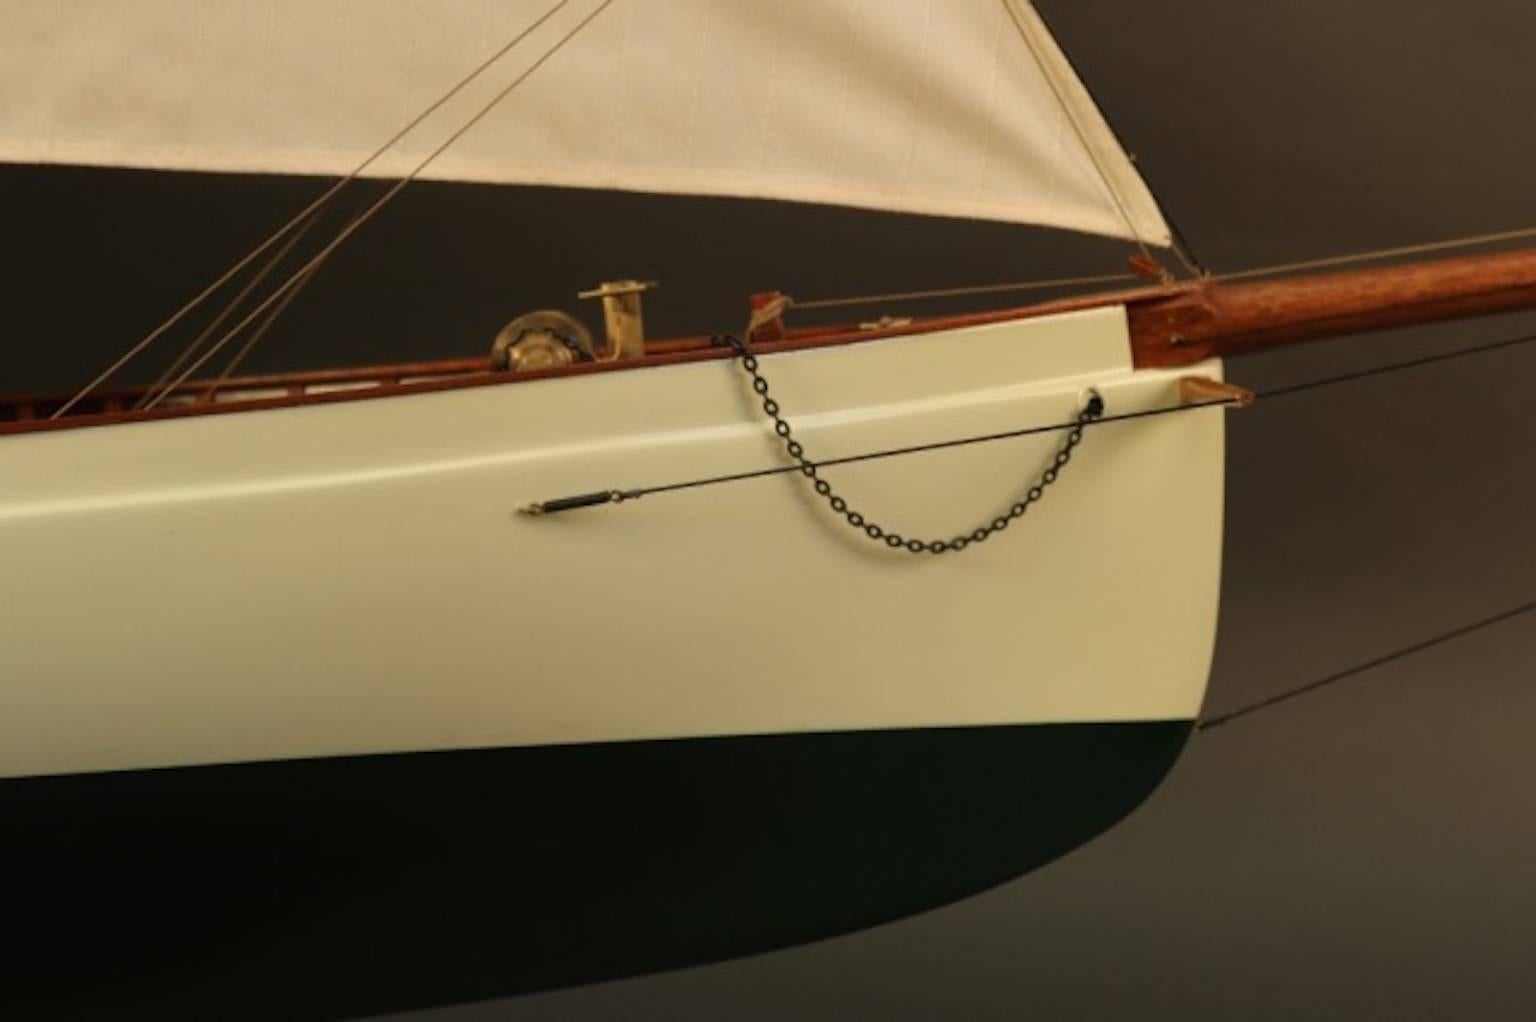 Expertly crafted model of the America's cup yacht "Puritan". Model is built with planked mahogany deck, skylights with brass bars, brass fittings, tiller, full suit of linen sails etc. No case.
Model dimensions: 73" L x 12" W x